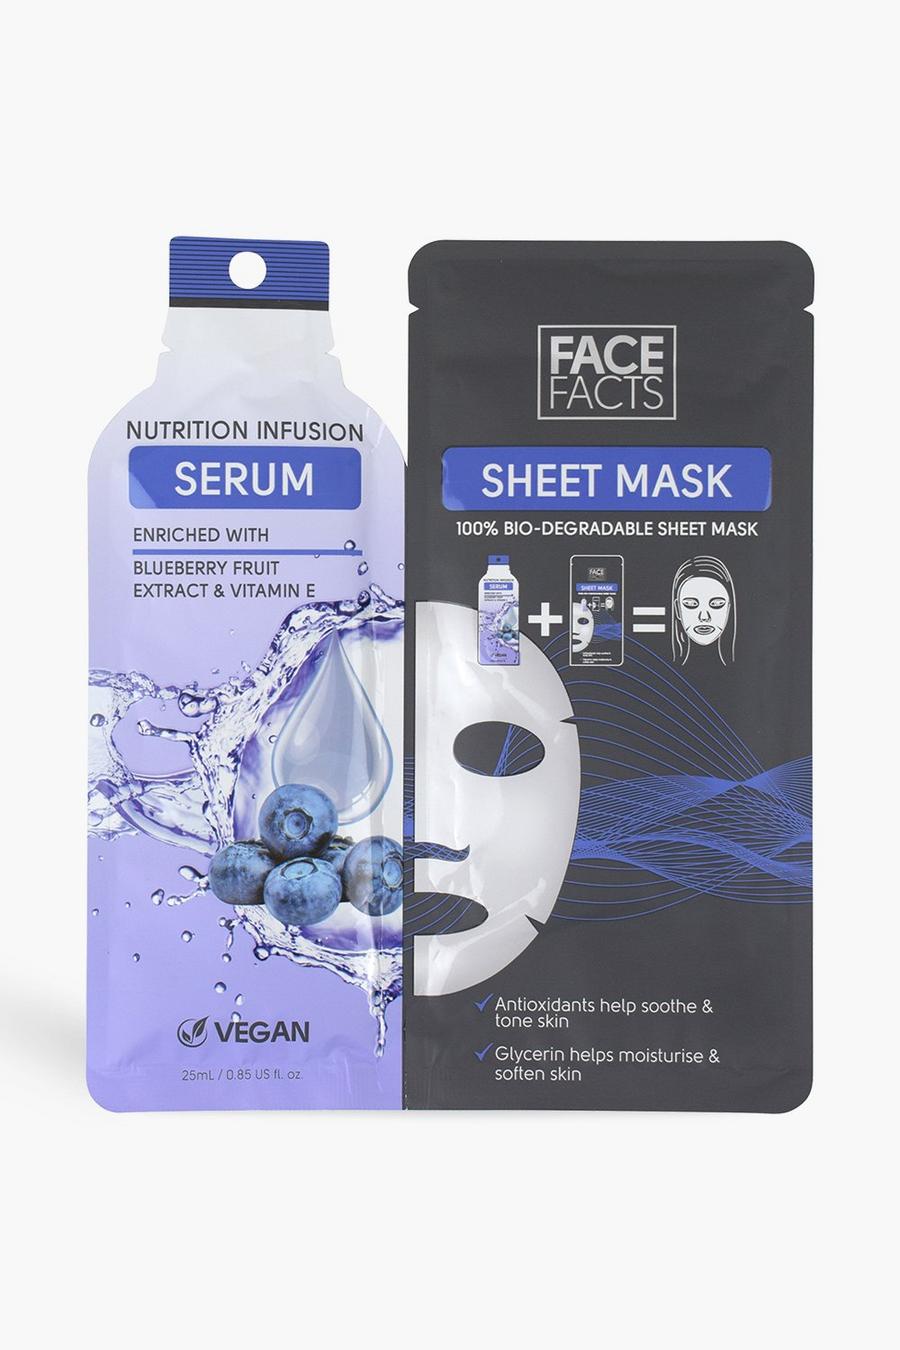 Blue blå Face Facts Serum Sheetmask - Nutrition Infusion